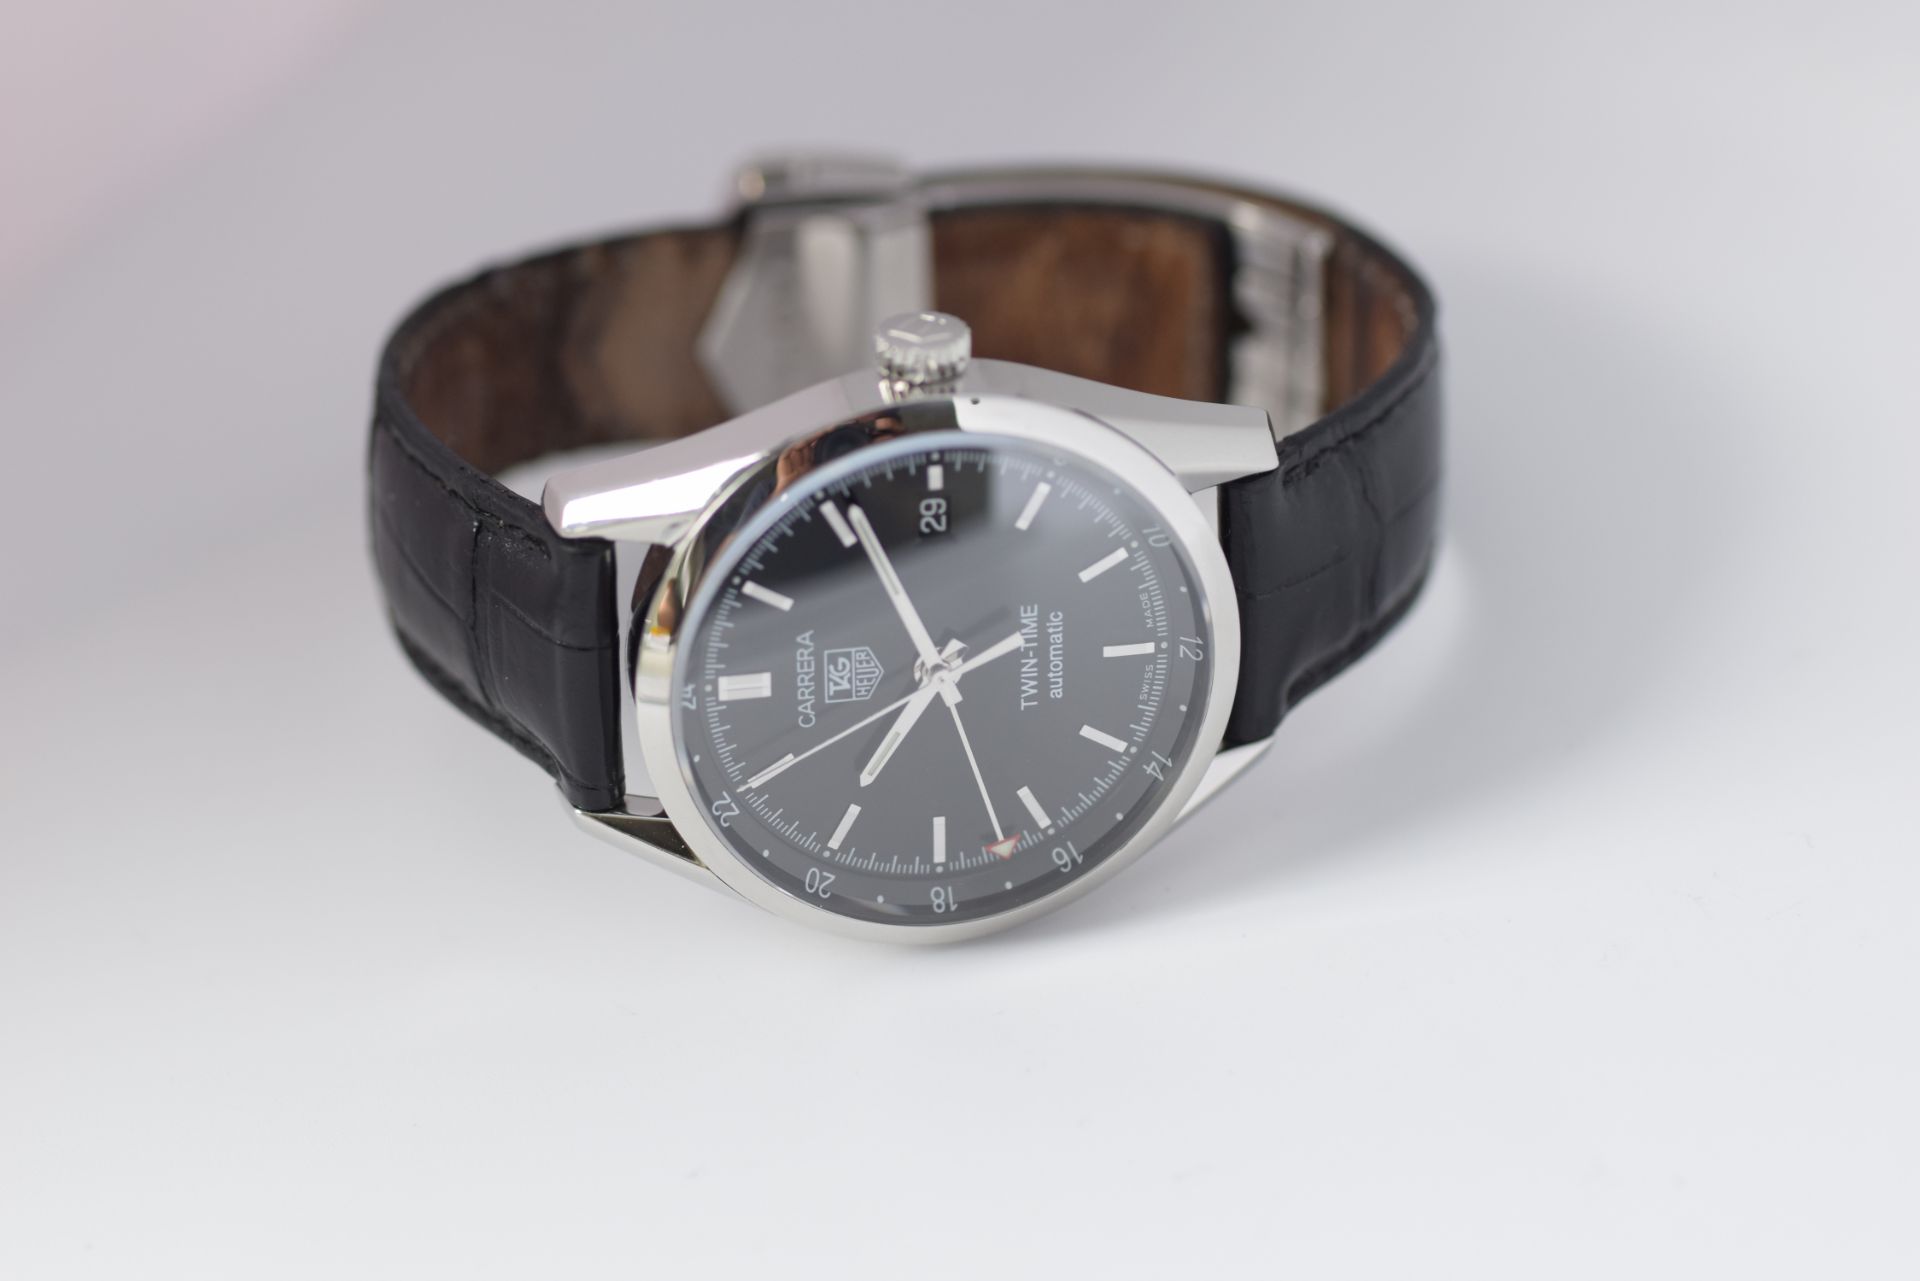 TAG HEUER CARRERA TWIN TIME WATCH WV2115 with warranty card - Image 6 of 10